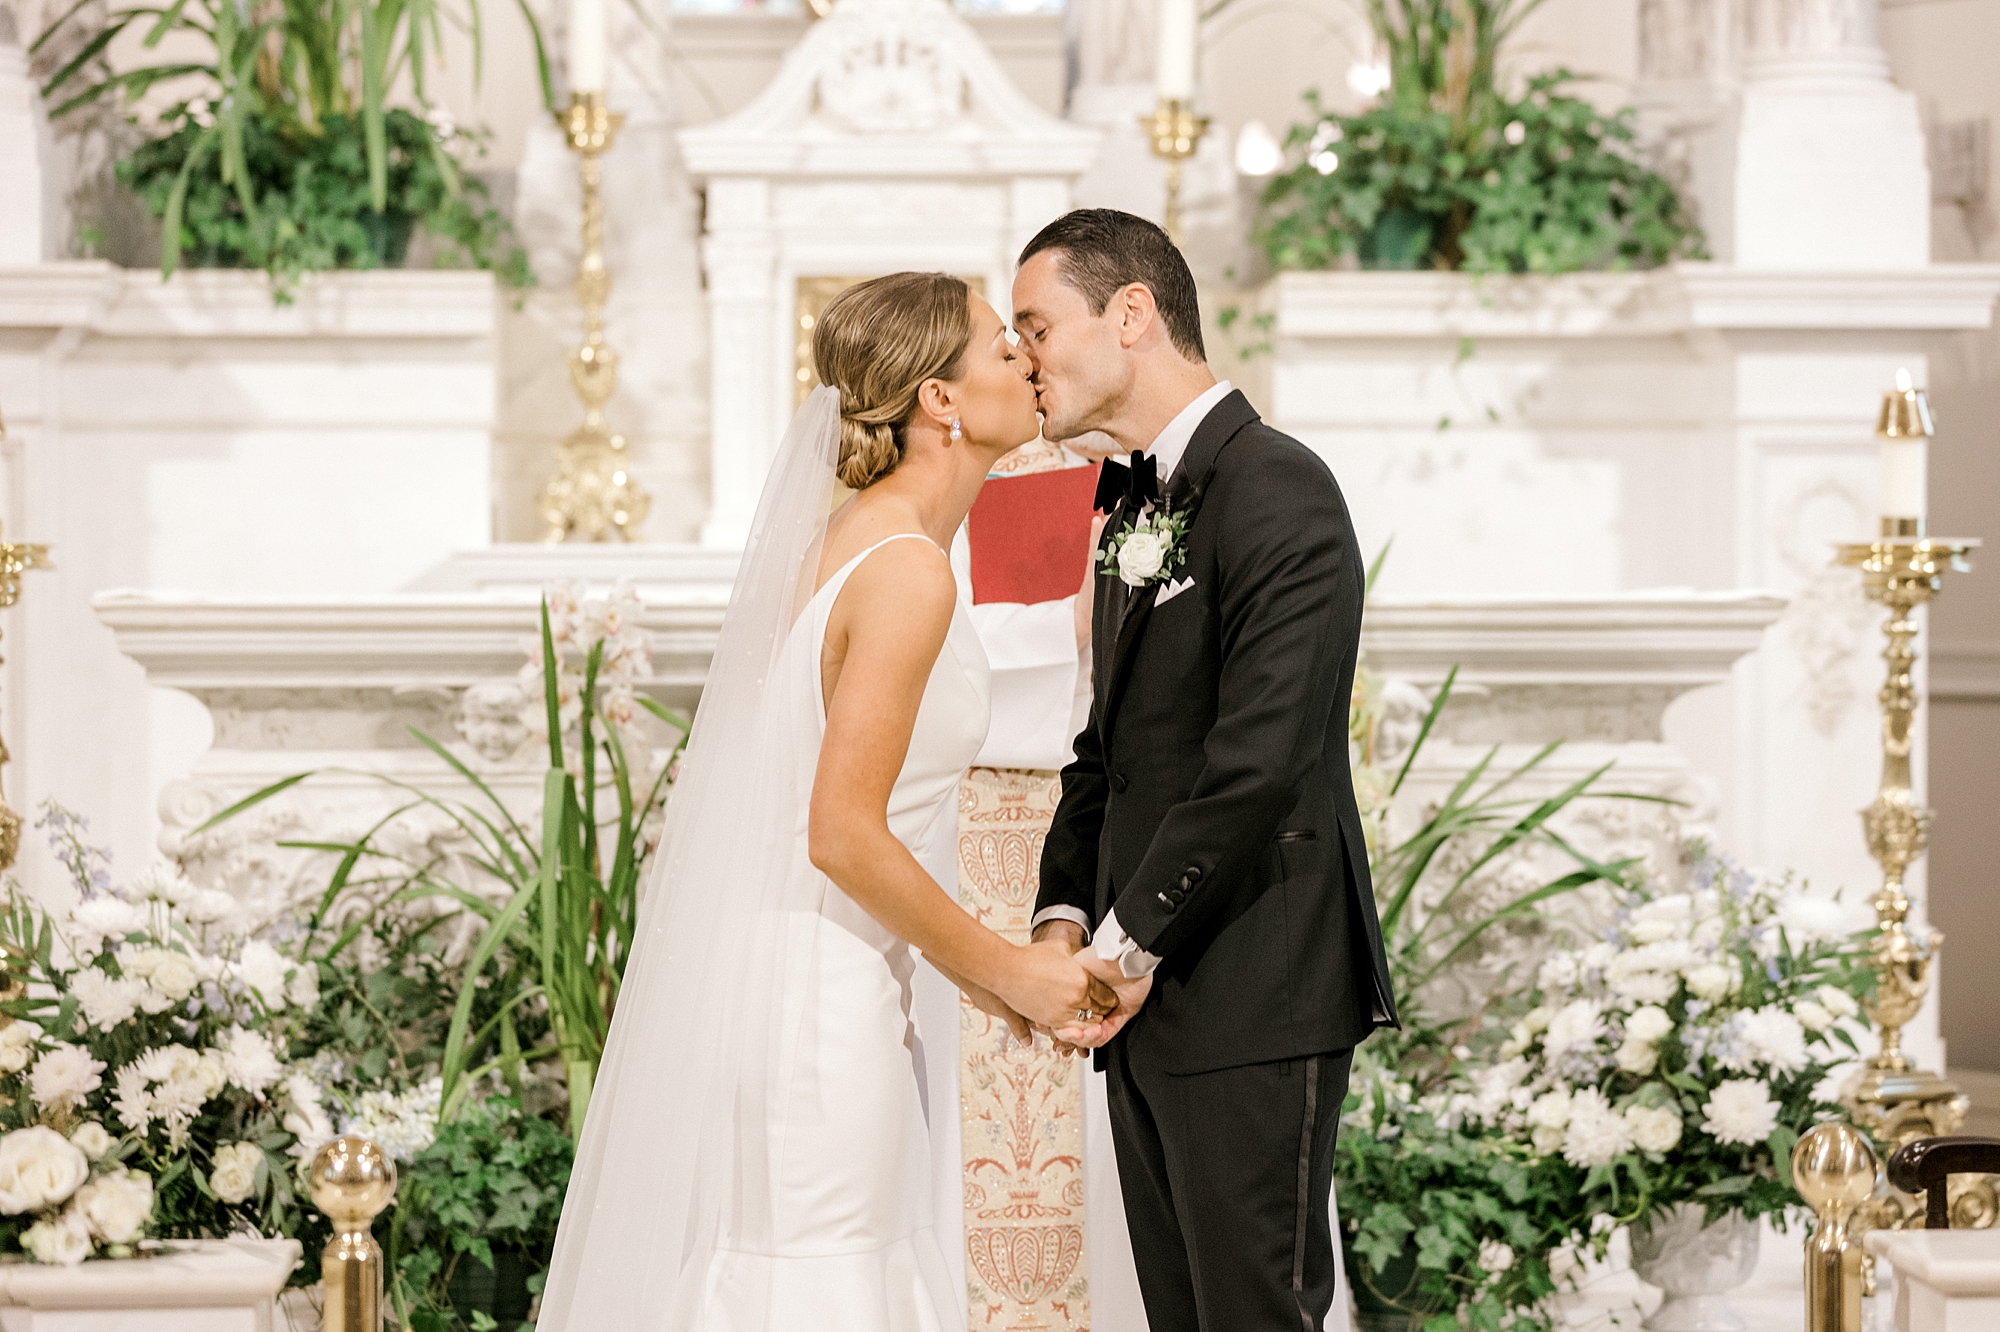 bride and groom kiss at alter during church wedding ceremony in New Jersey